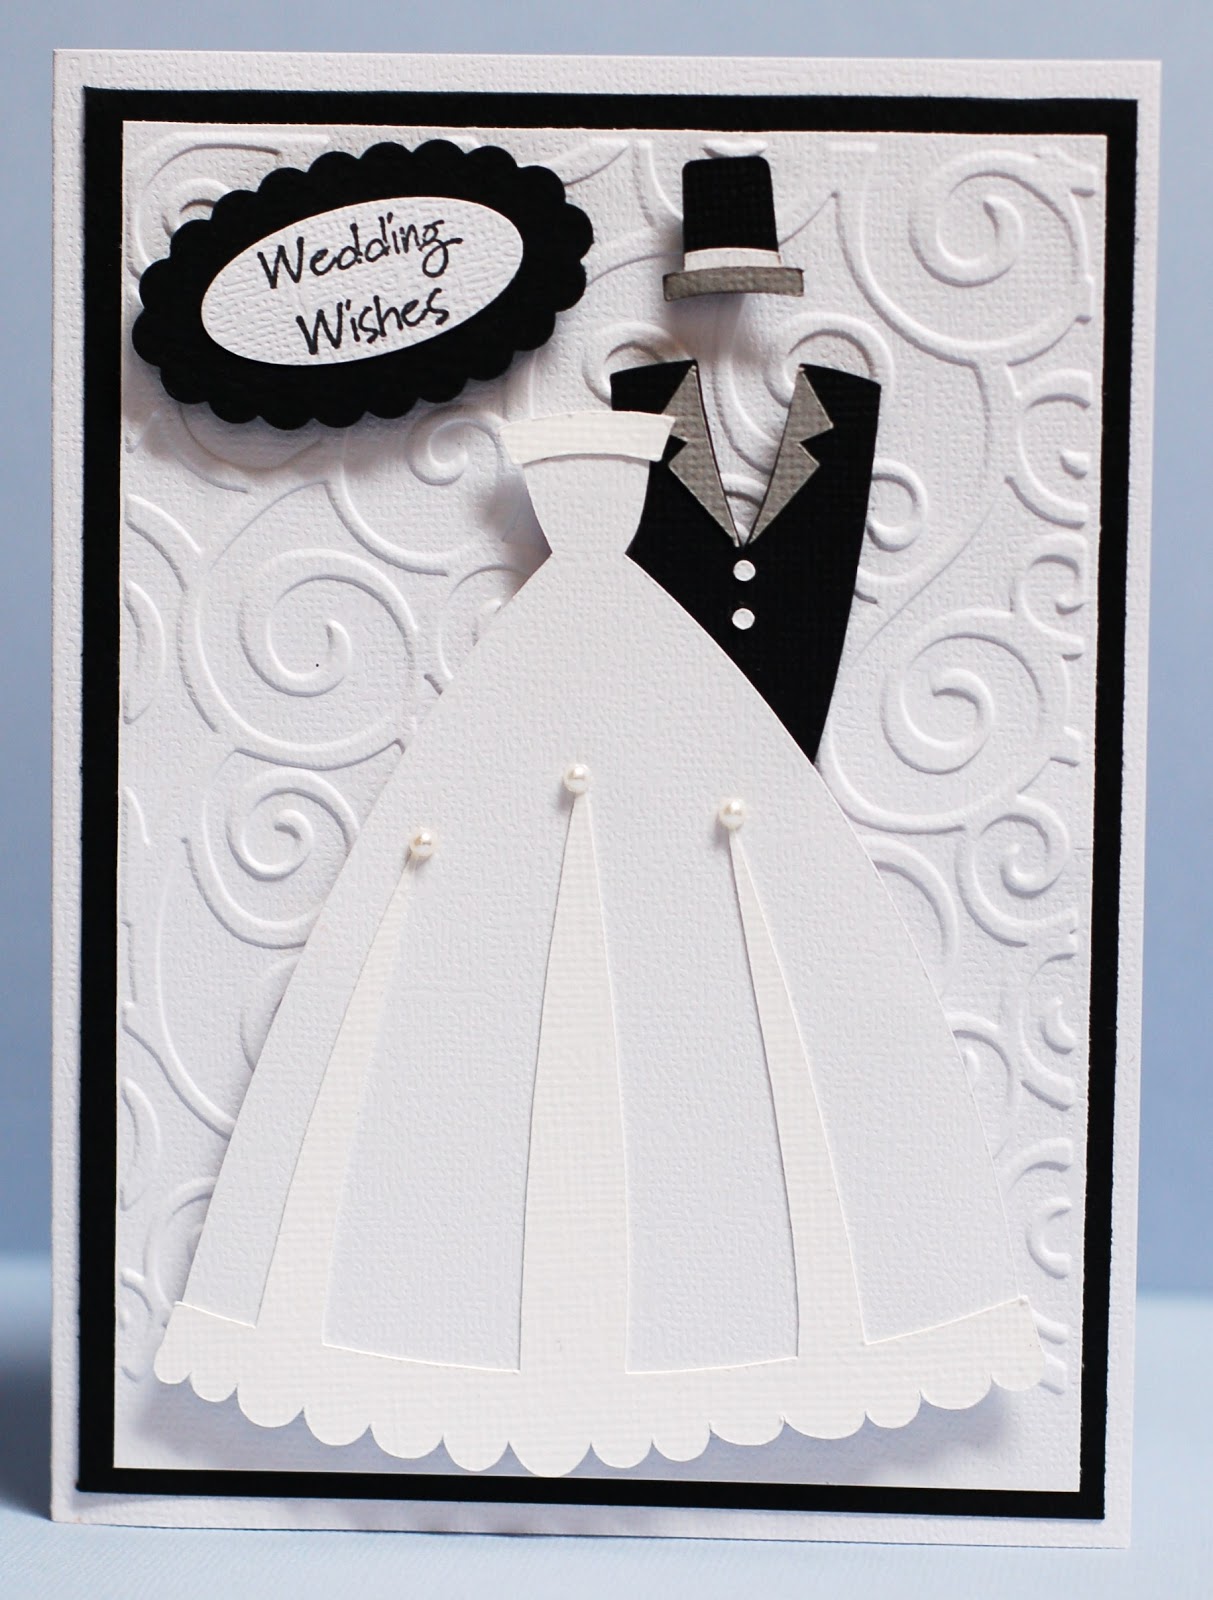 about-marriage-cards-marriage-2013-wedding-cards-2014